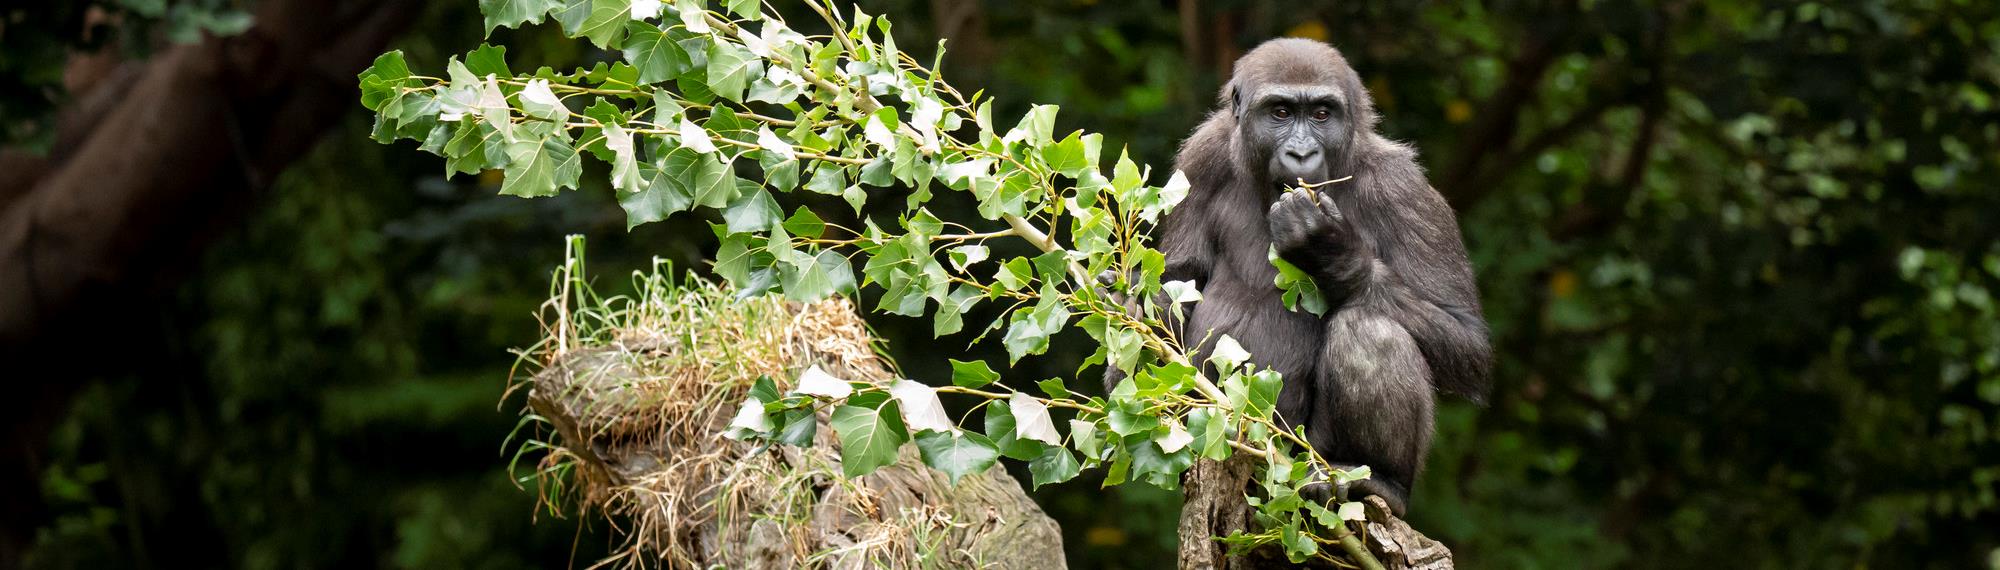 Young gorilla sitting on a log eating from a branch of fresh leaves.